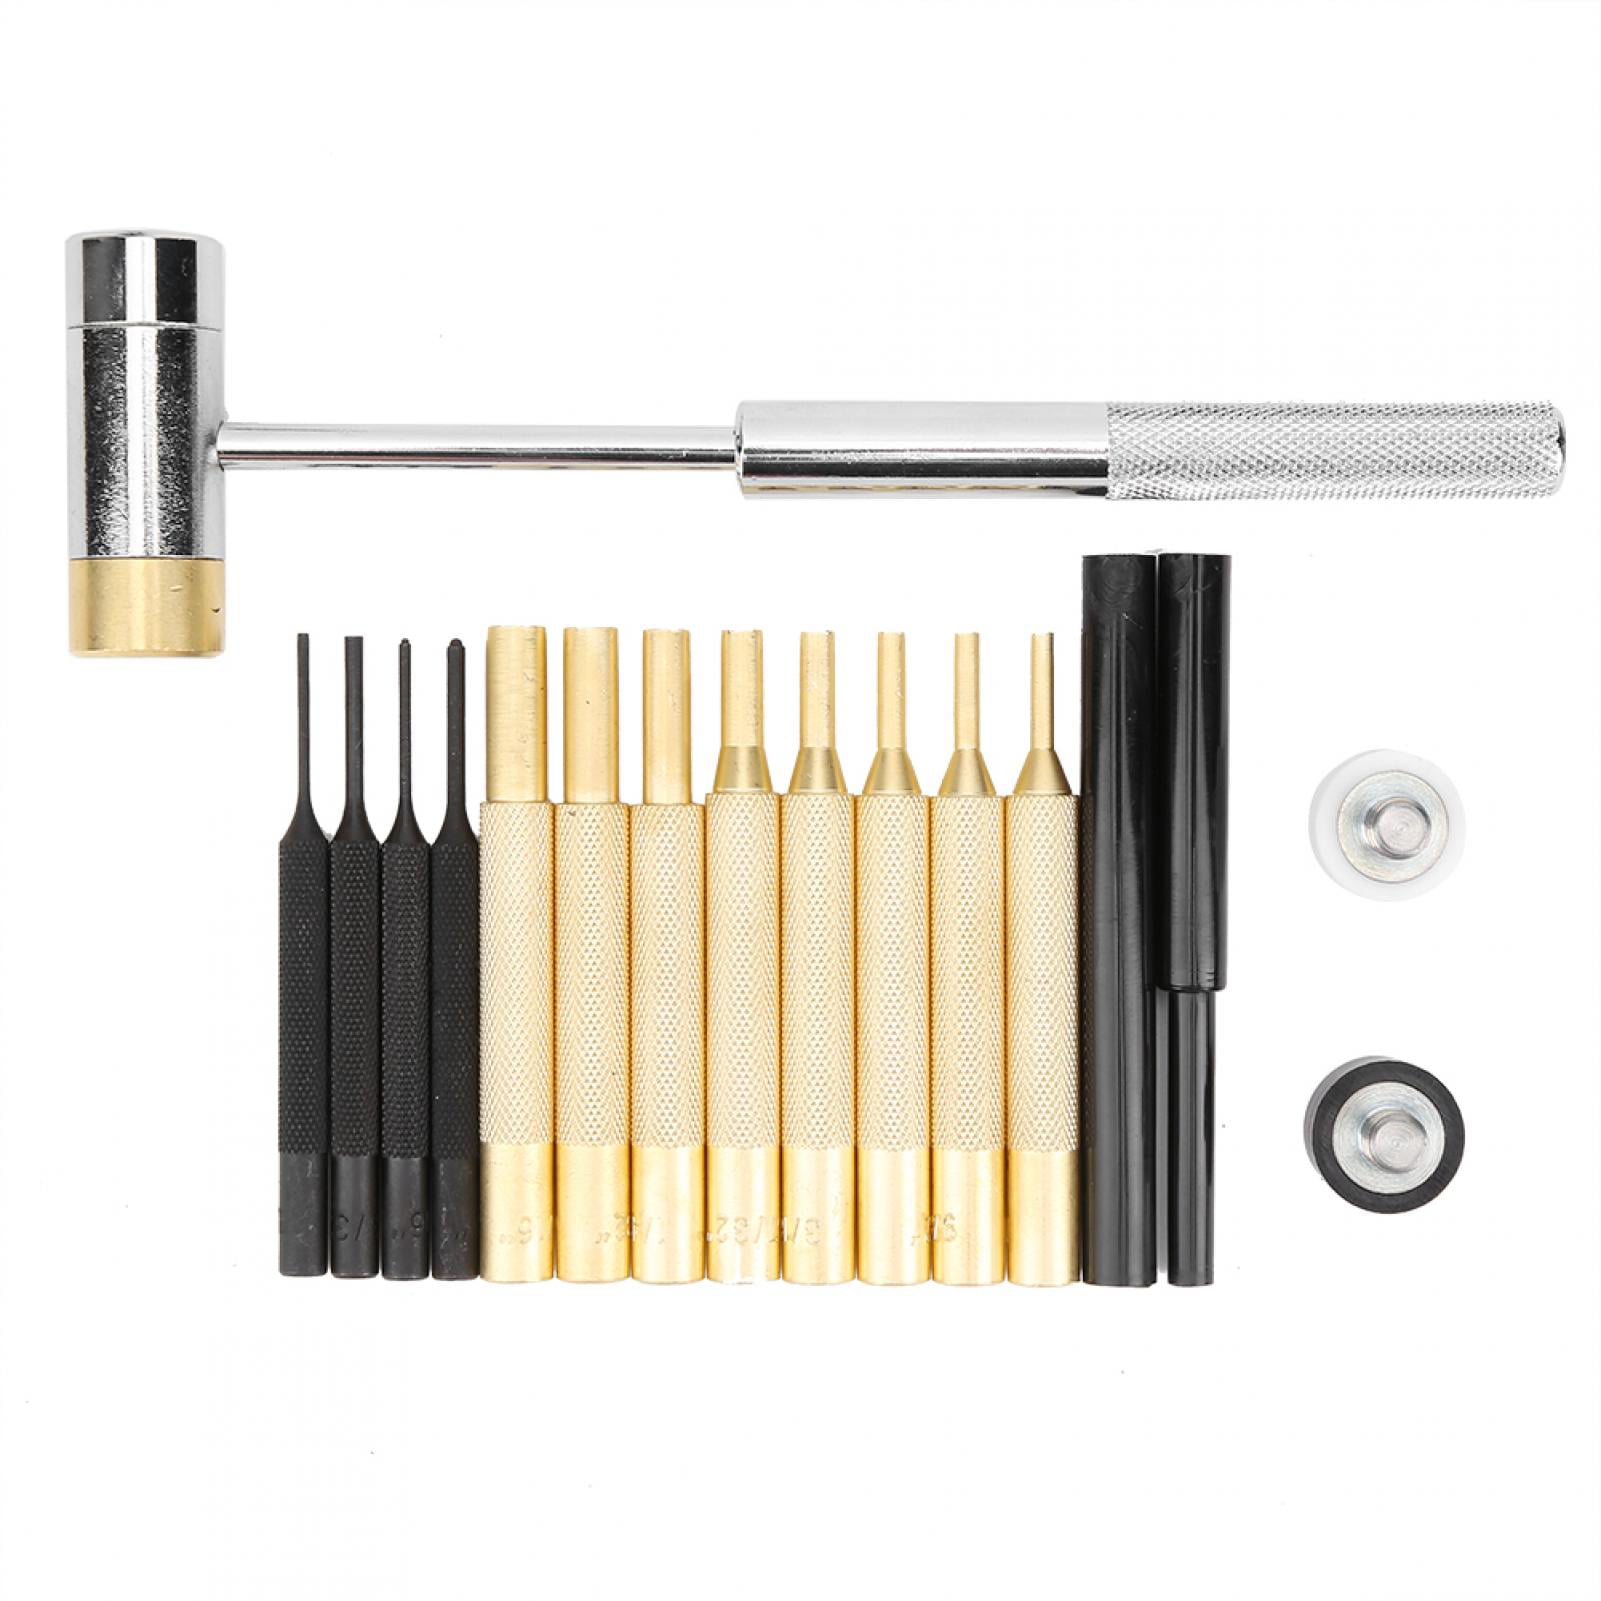 Details about   Hammer and Punch Set with Brass Steel Plastic Punches Hammer and Storage Case 